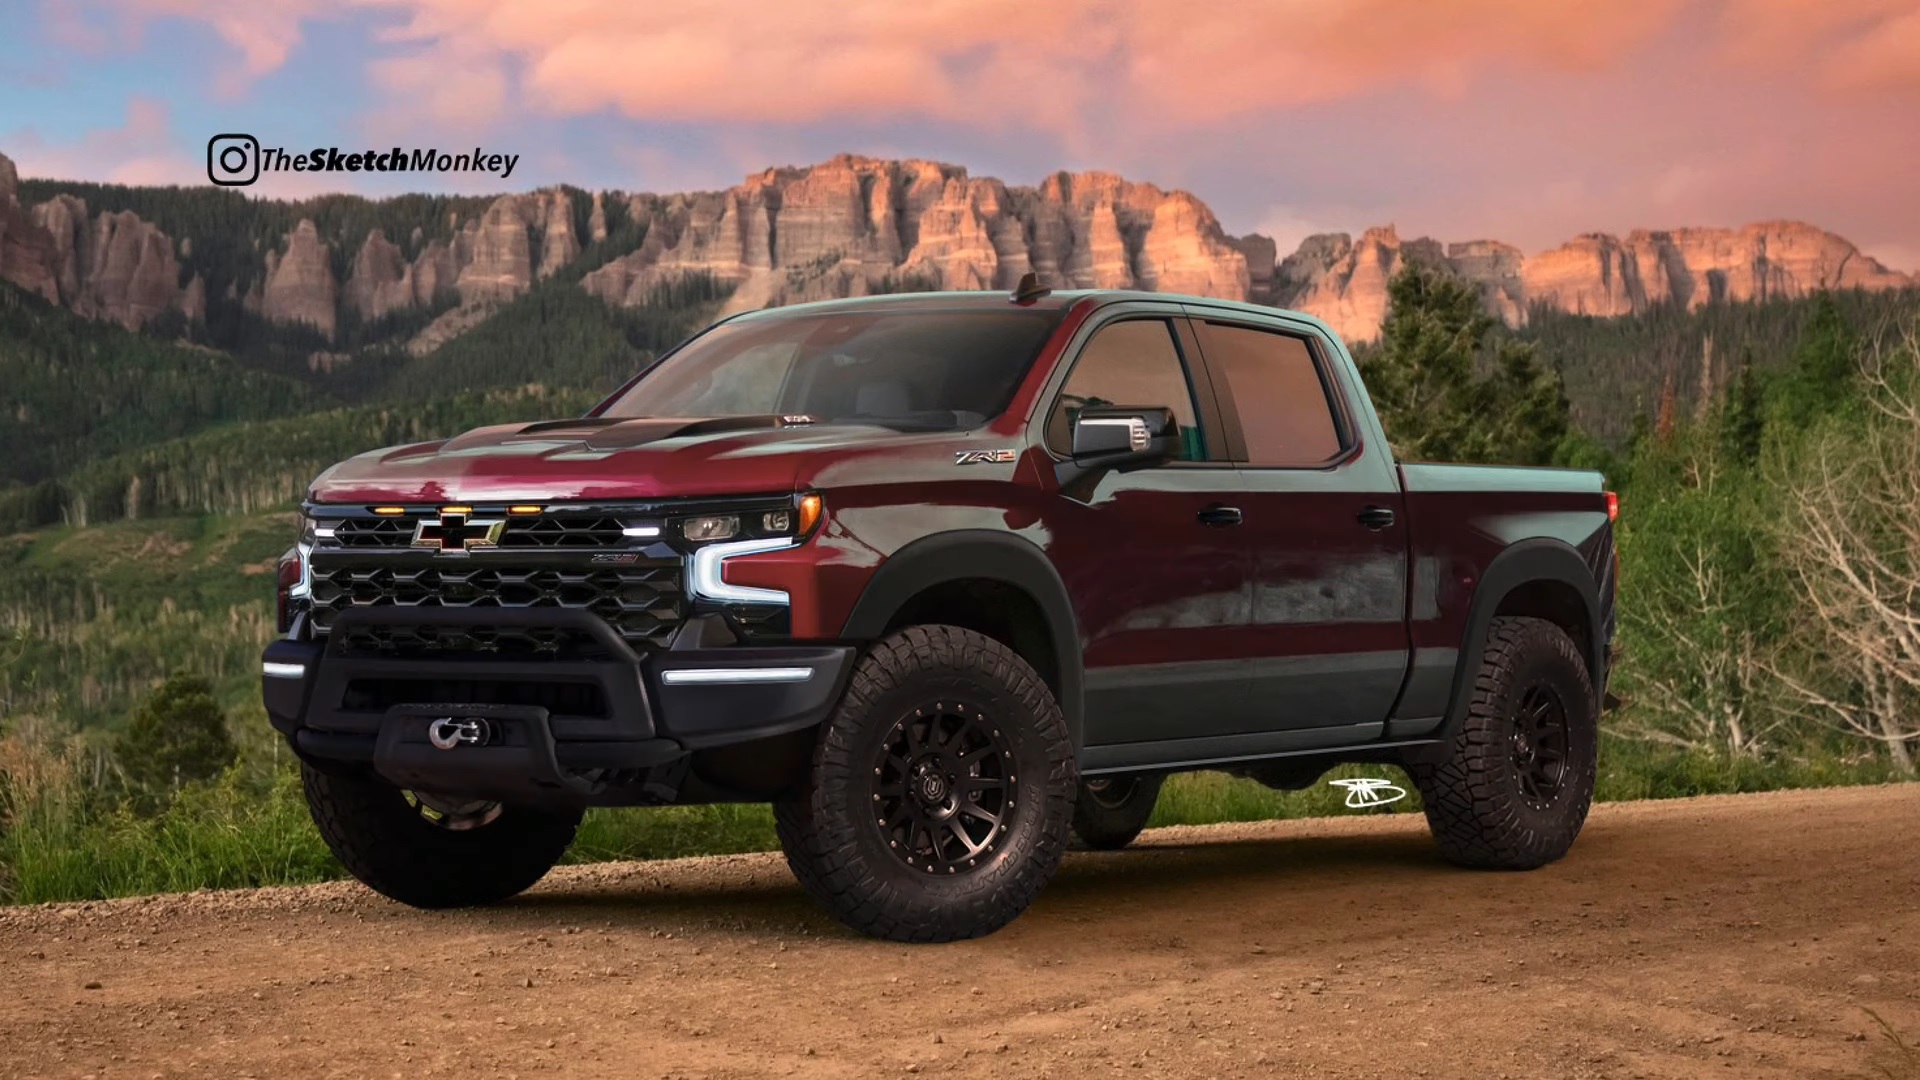 With 4 Engine Options For the 2023 Chevy Silverado What's the Best One?